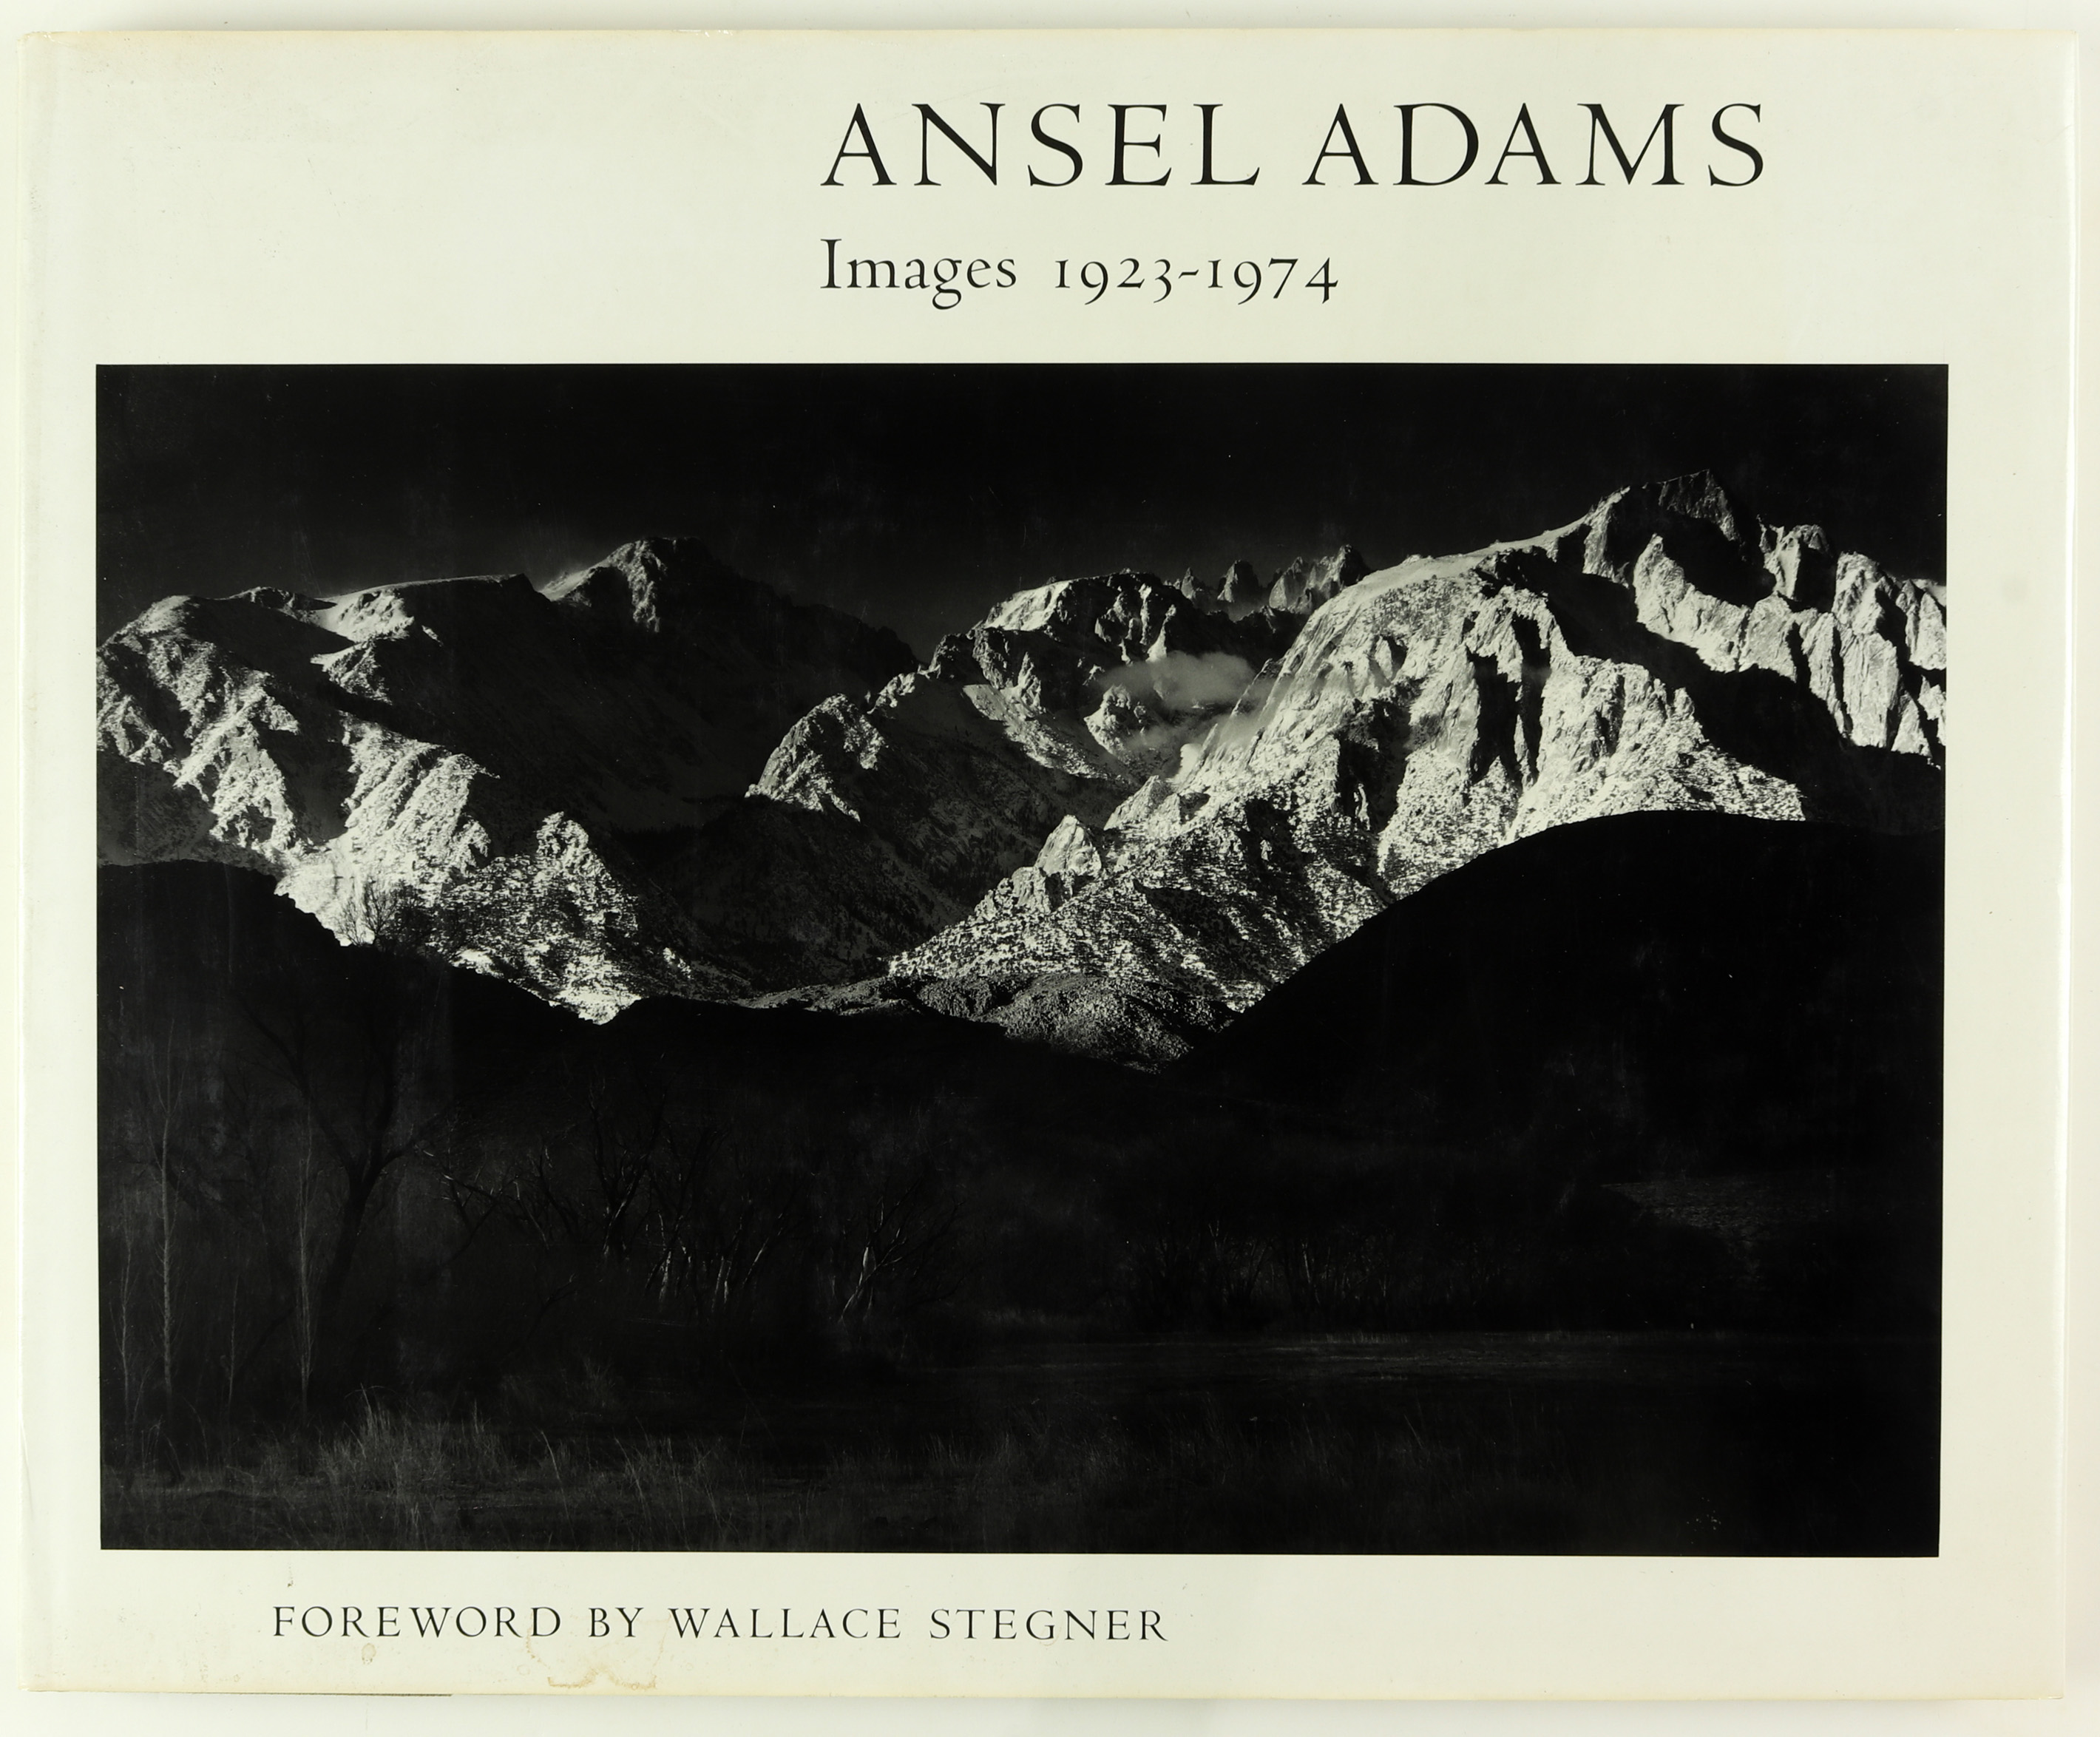 BOOK, ANSEL ADAMS, IMAGES: 1923-1974